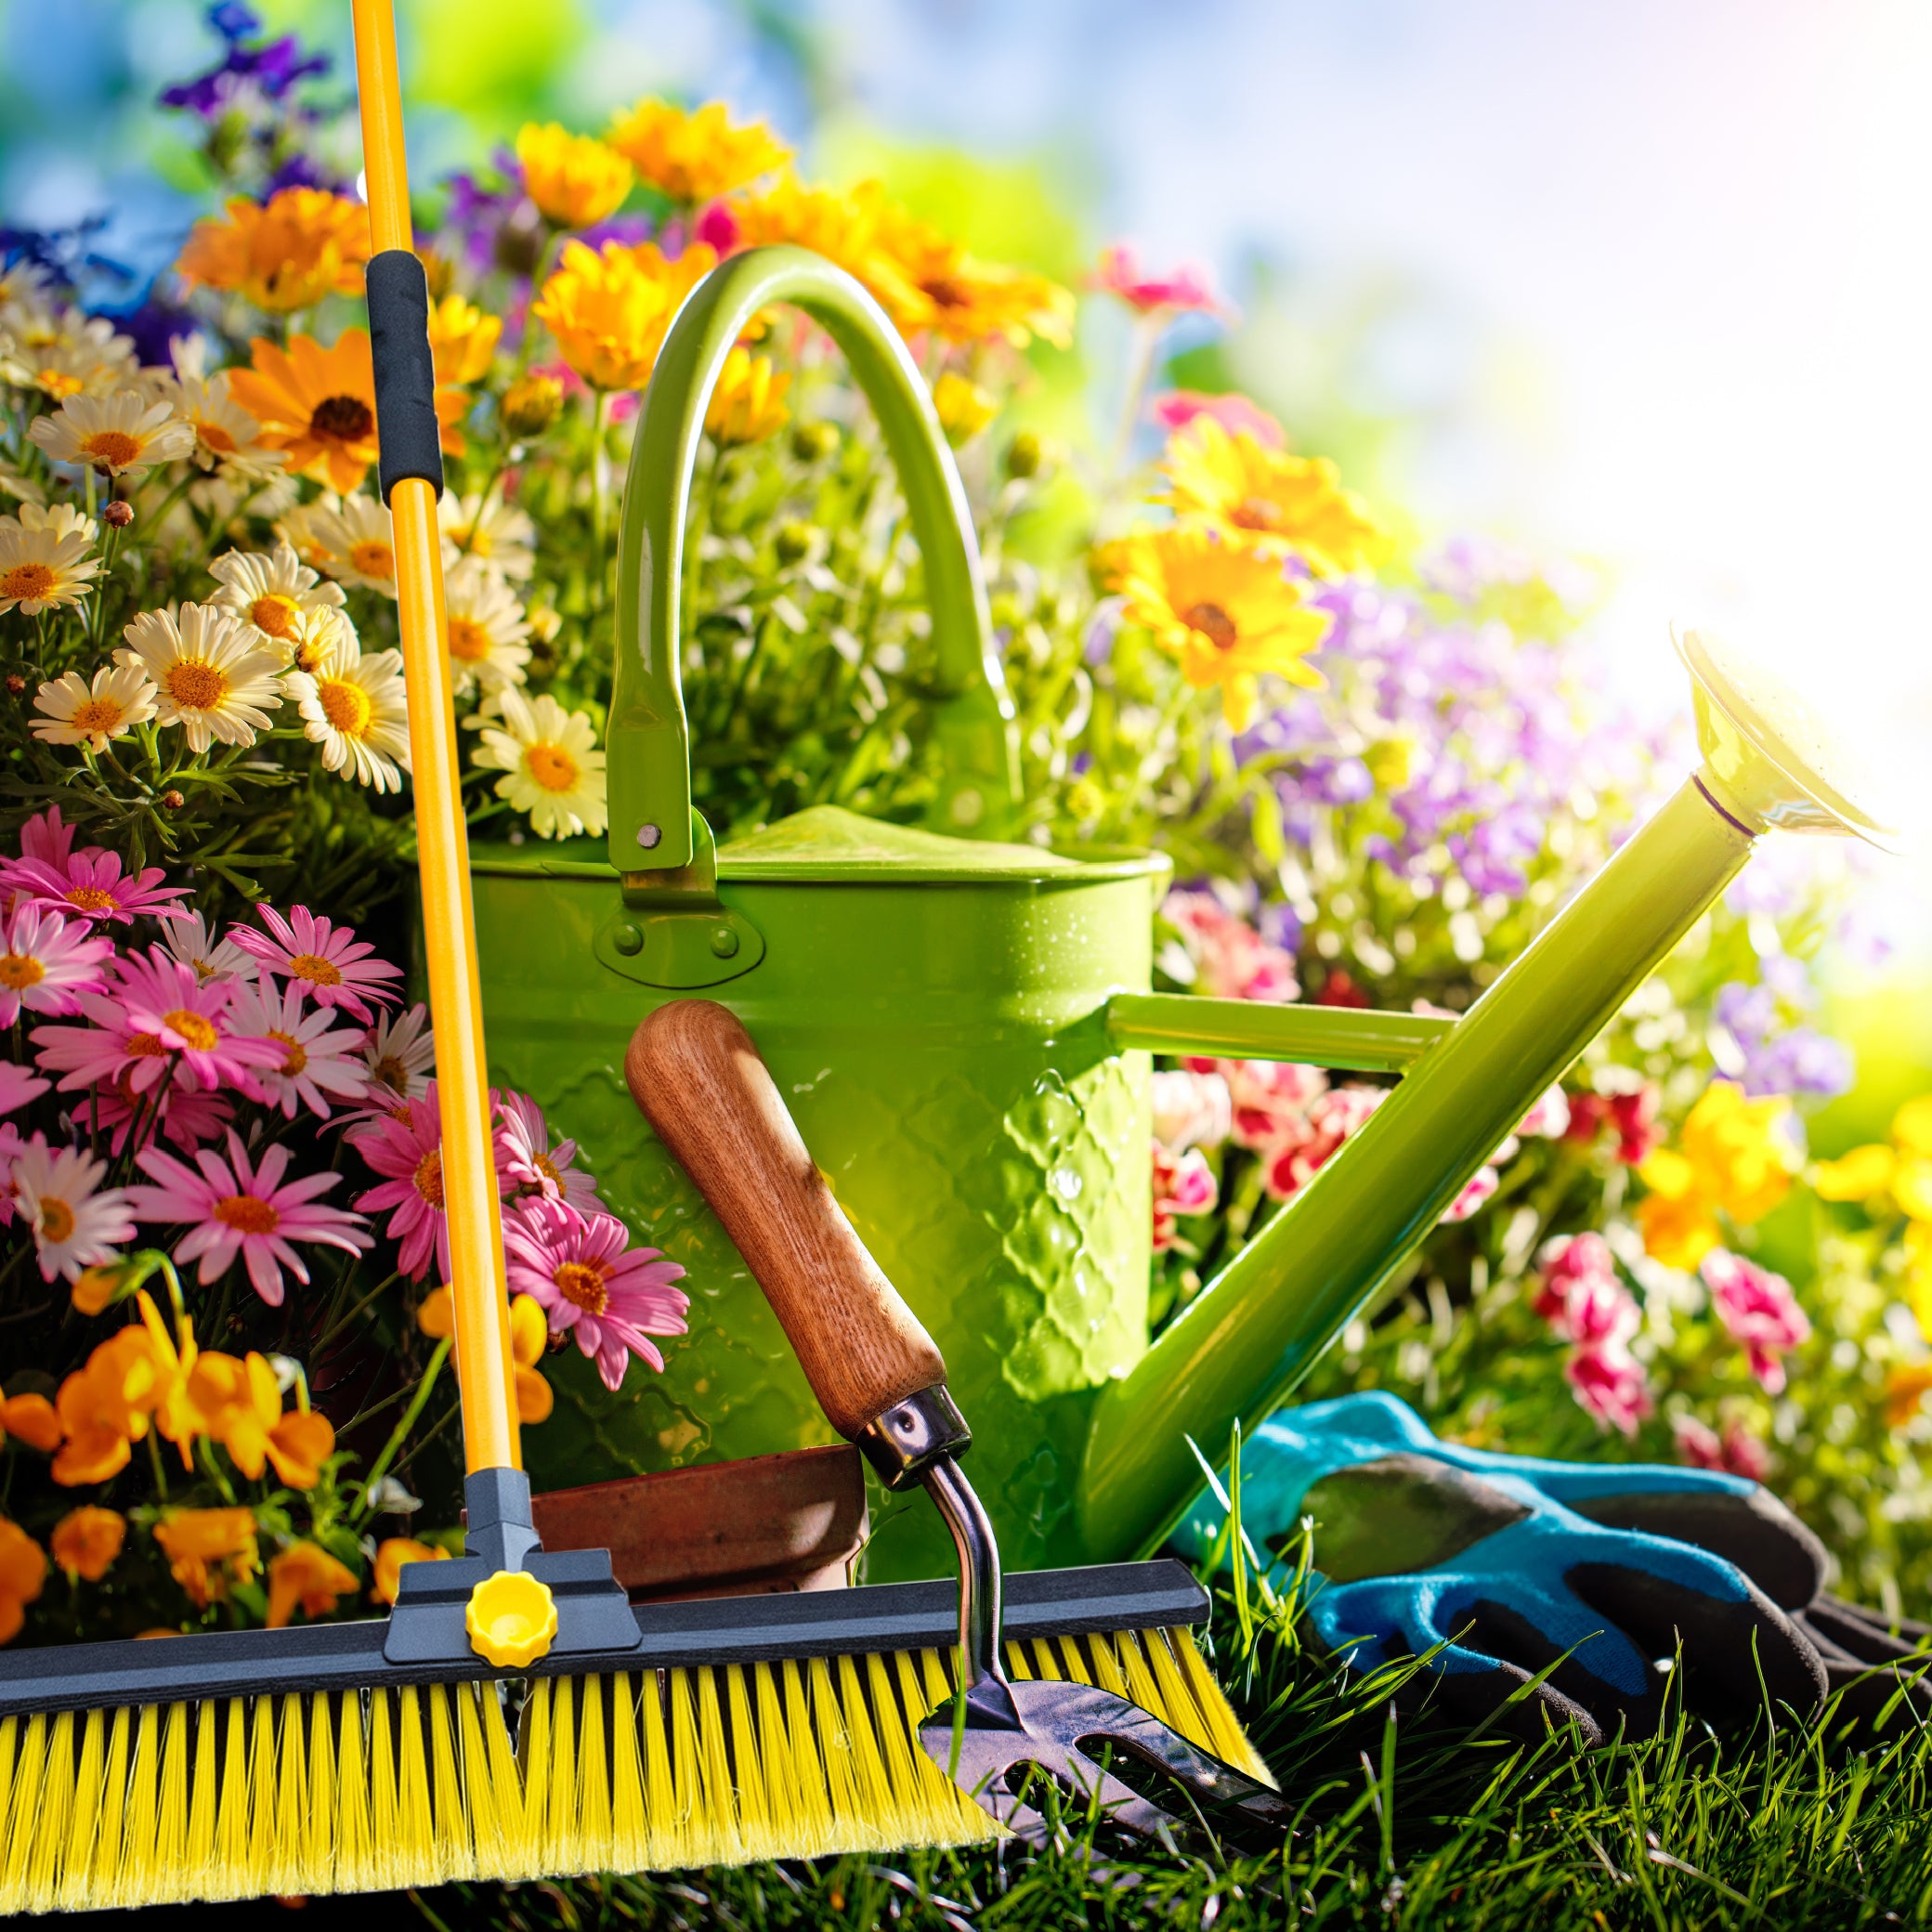 Garden tools and accessories